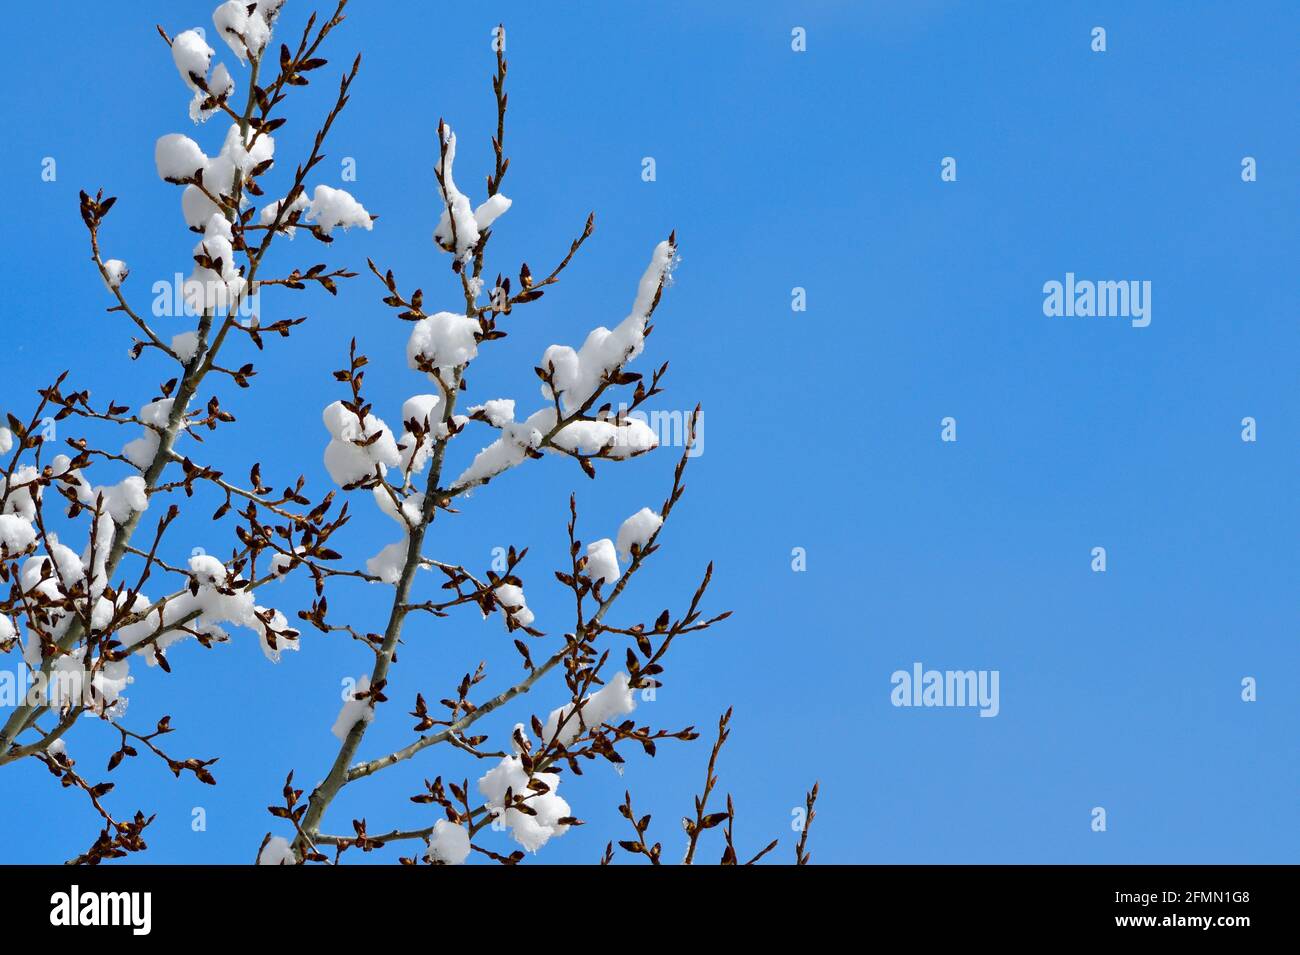 A spring snow stuck to the tree branches along with the new tree buds against a blue sky in rural Alberta Canada Stock Photo